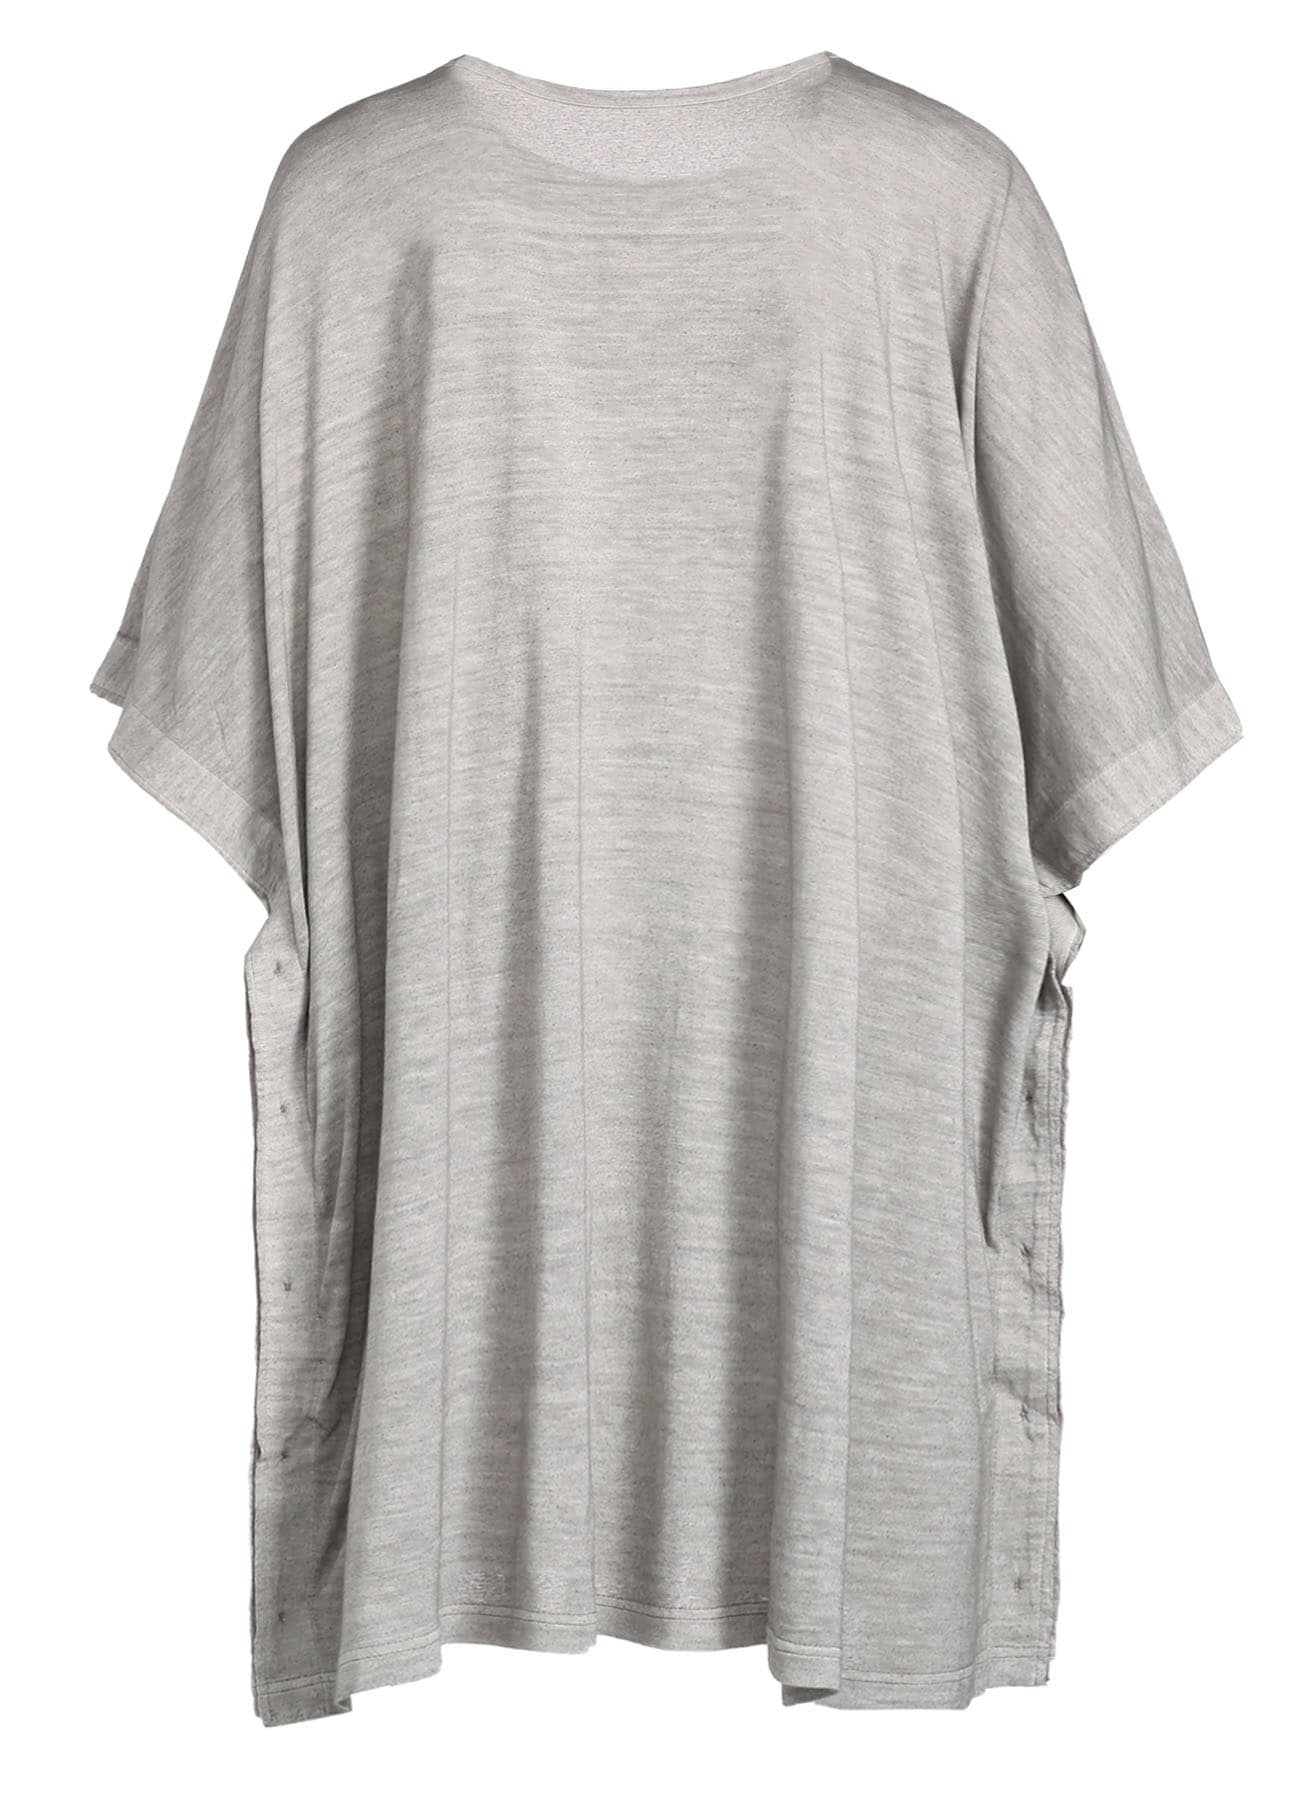 SUMI INK-DYED LINEN JERSEY SIDE BUTTON HALF SLEEVE BIG T-SHIRT